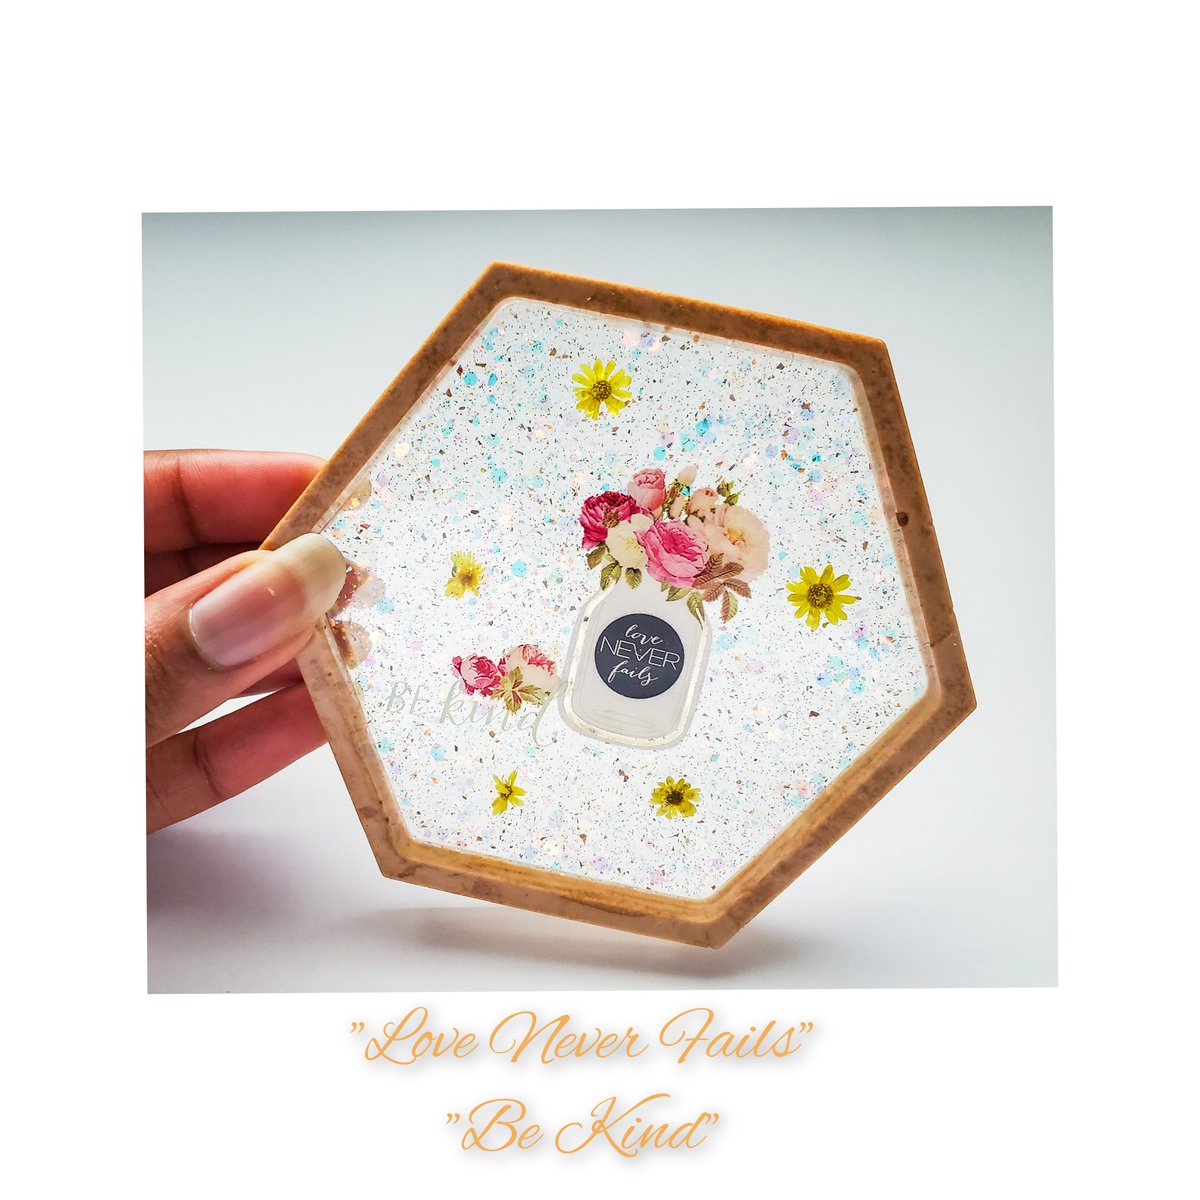 New Product ✨️! Inspirational Resin Coasters ☕️💐 - Set of 4
etsy.com/listing/172257…
#etsyshop #handmadehour #giftsforher #giftsforfriend #womaninbizhour #SpringHasCome #SummerVibes #inspiration #Motivation #resin #coasters #CoffeeLover #uniquegifts #tuesdayvibe #NEW